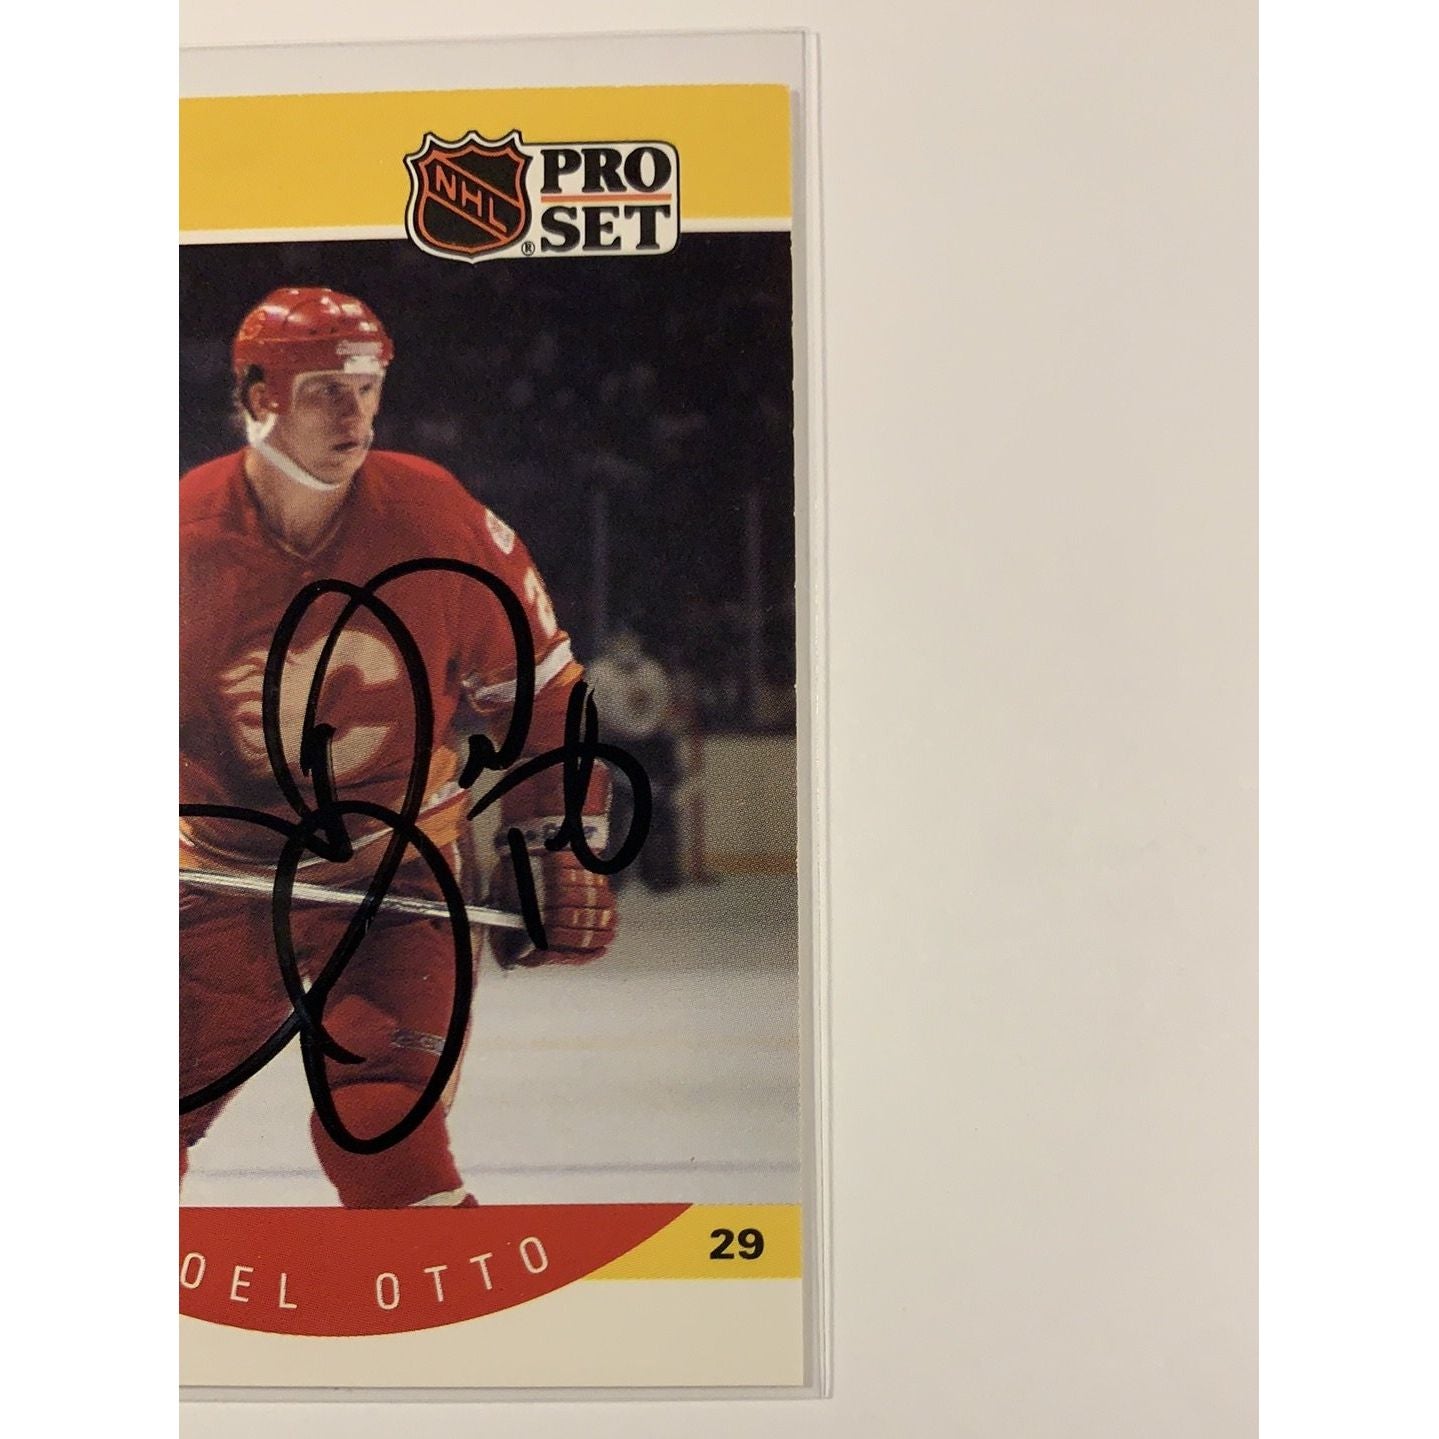  1990 Pro Set Joel Otto In Person Auto  Local Legends Cards & Collectibles